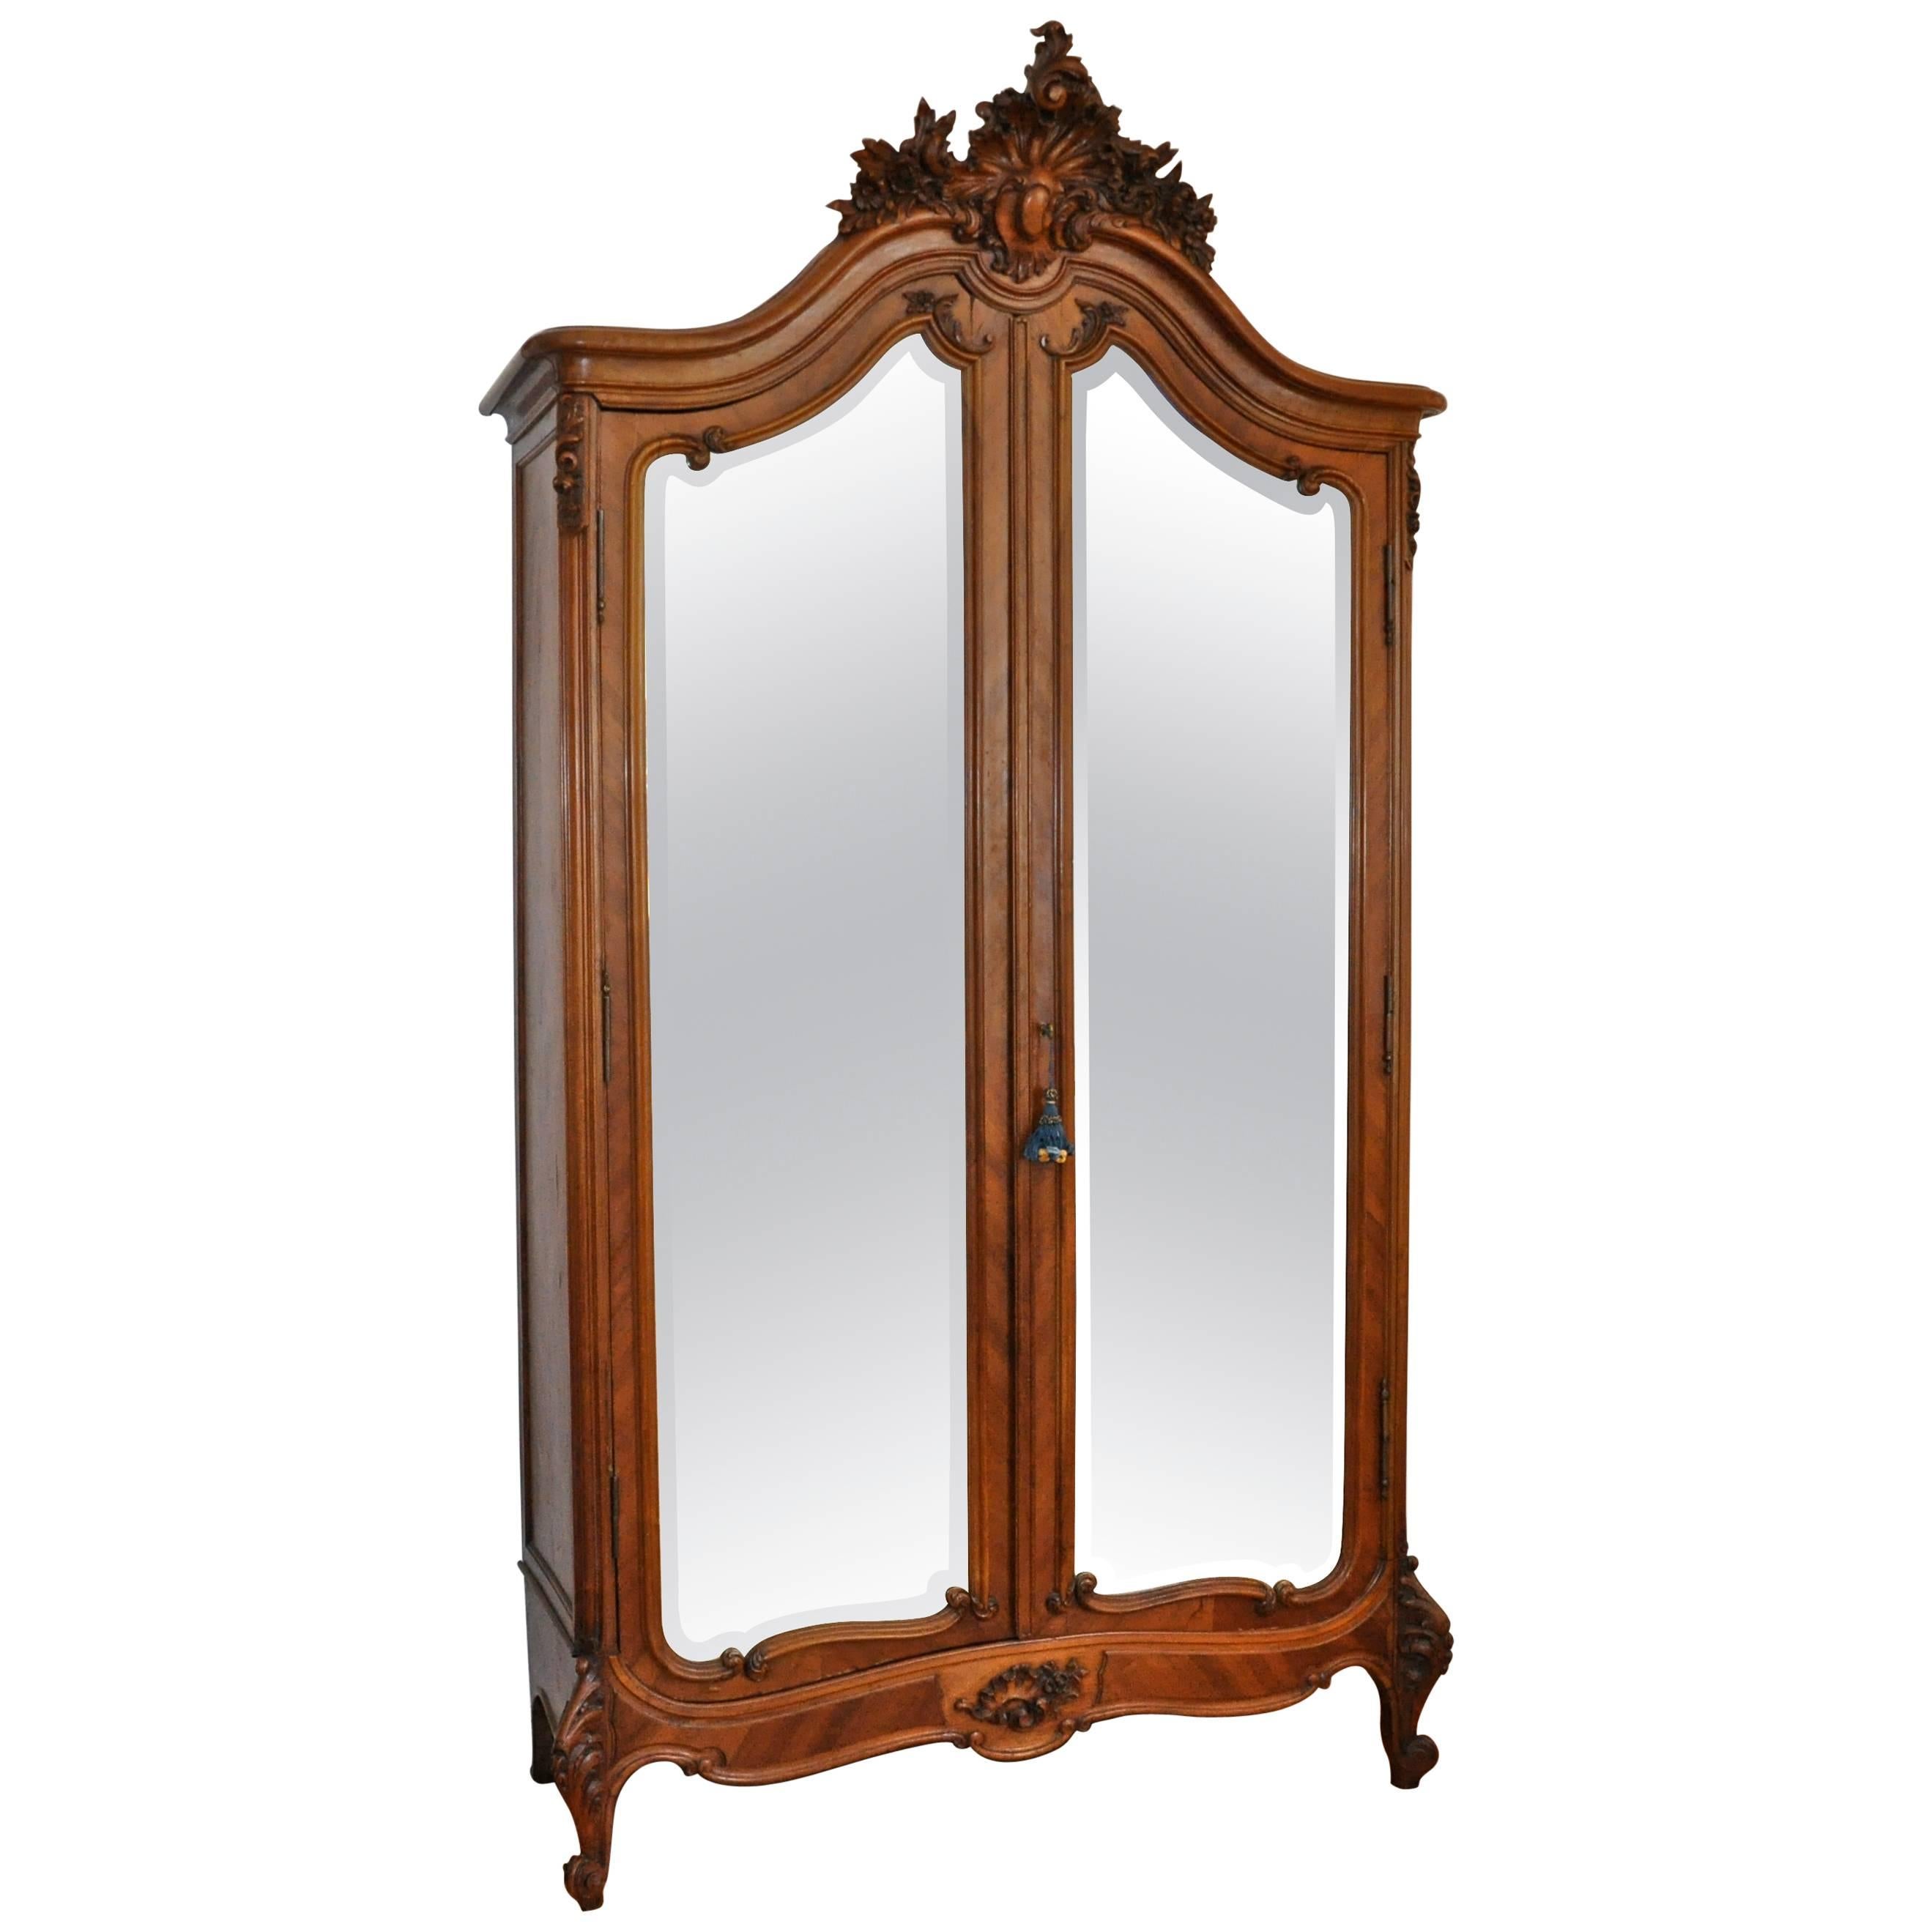 Late 19th Century French Louis XV Style Mirrored Walnut Armoire